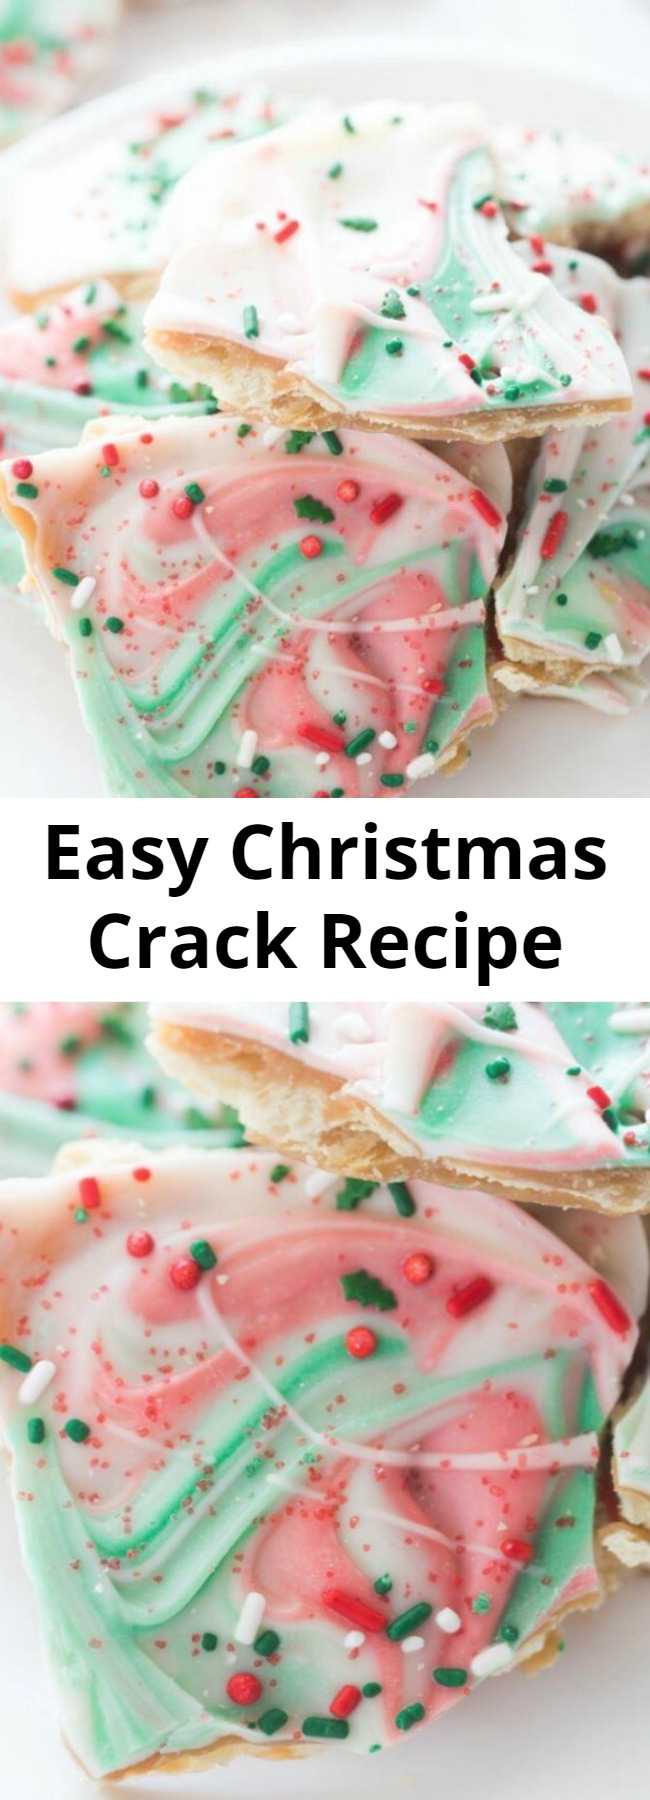 Easy Christmas Crack Recipe - Don't miss this Easy Christmas Crack Recipe for one of the best holiday party treats and gift recipes for your friends, neighbors, and co-workers! This is so easy to make and always a crowd favorite! #christmas #treats #desserts #gift #ideas #snacks #white #chocolate